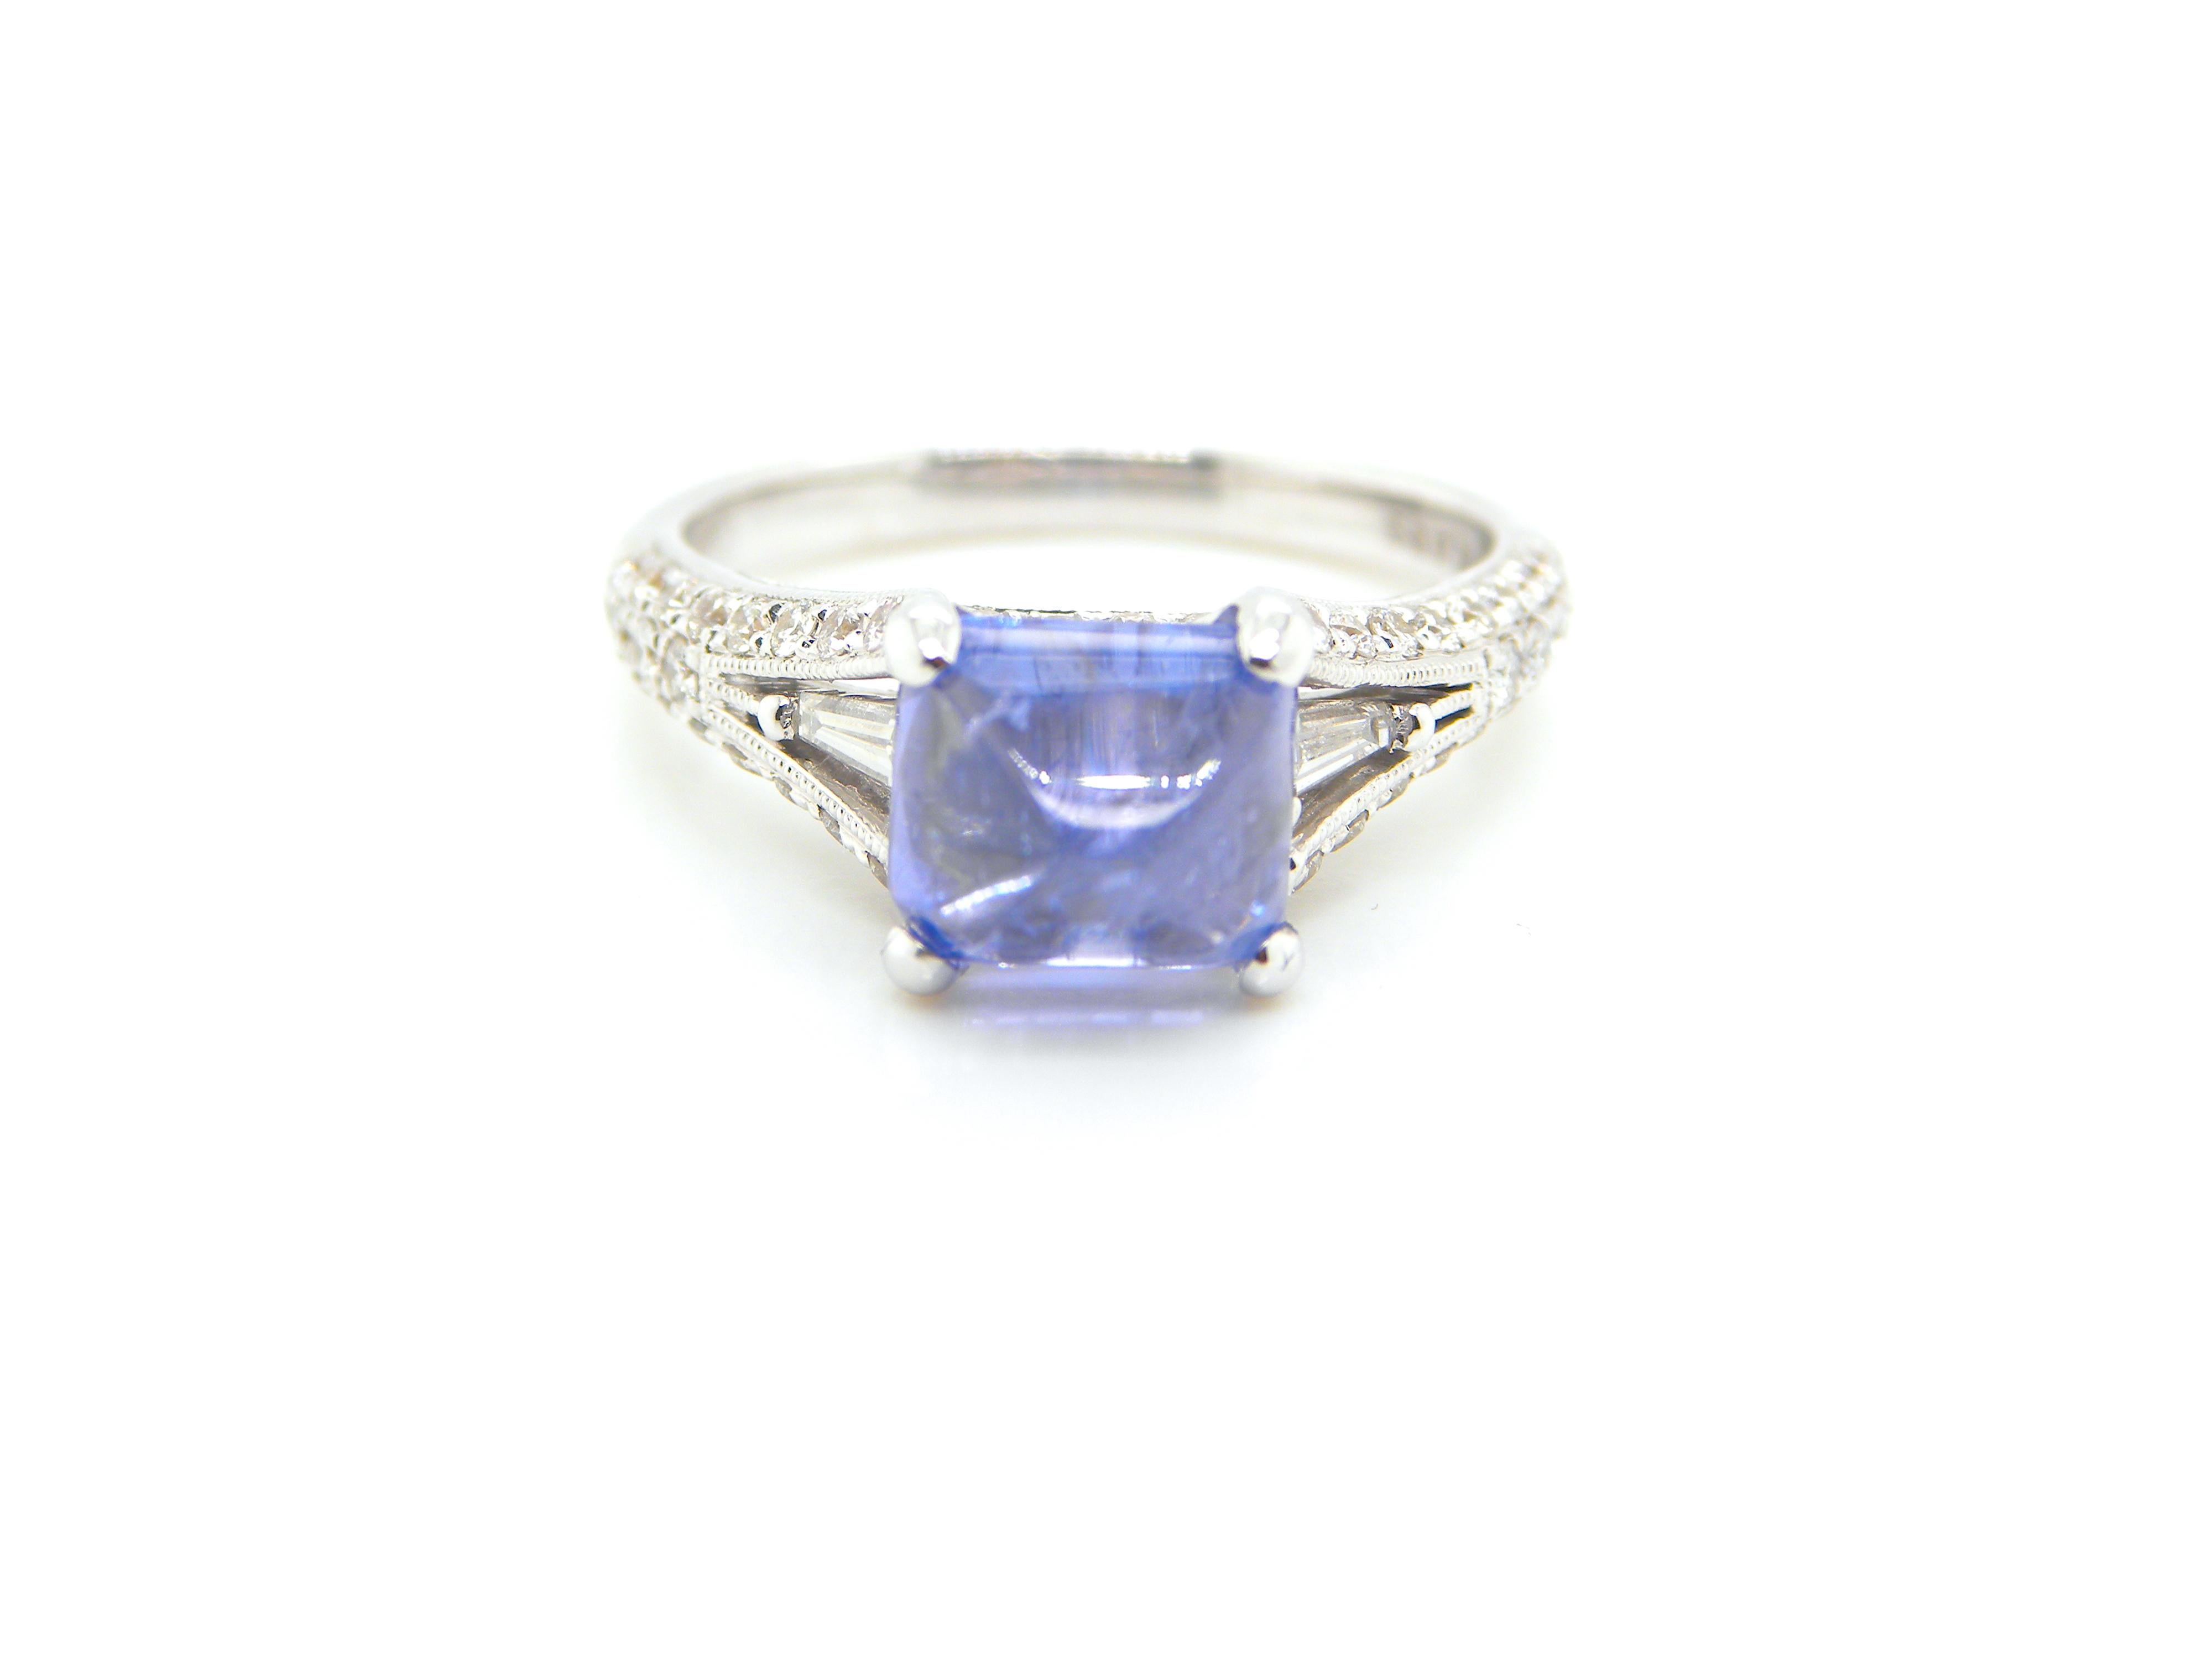 Sugarloaf Cabochon 3.17 Carat GIA Certified Burma No Heat Colour Change Sapphire and Diamond Ring